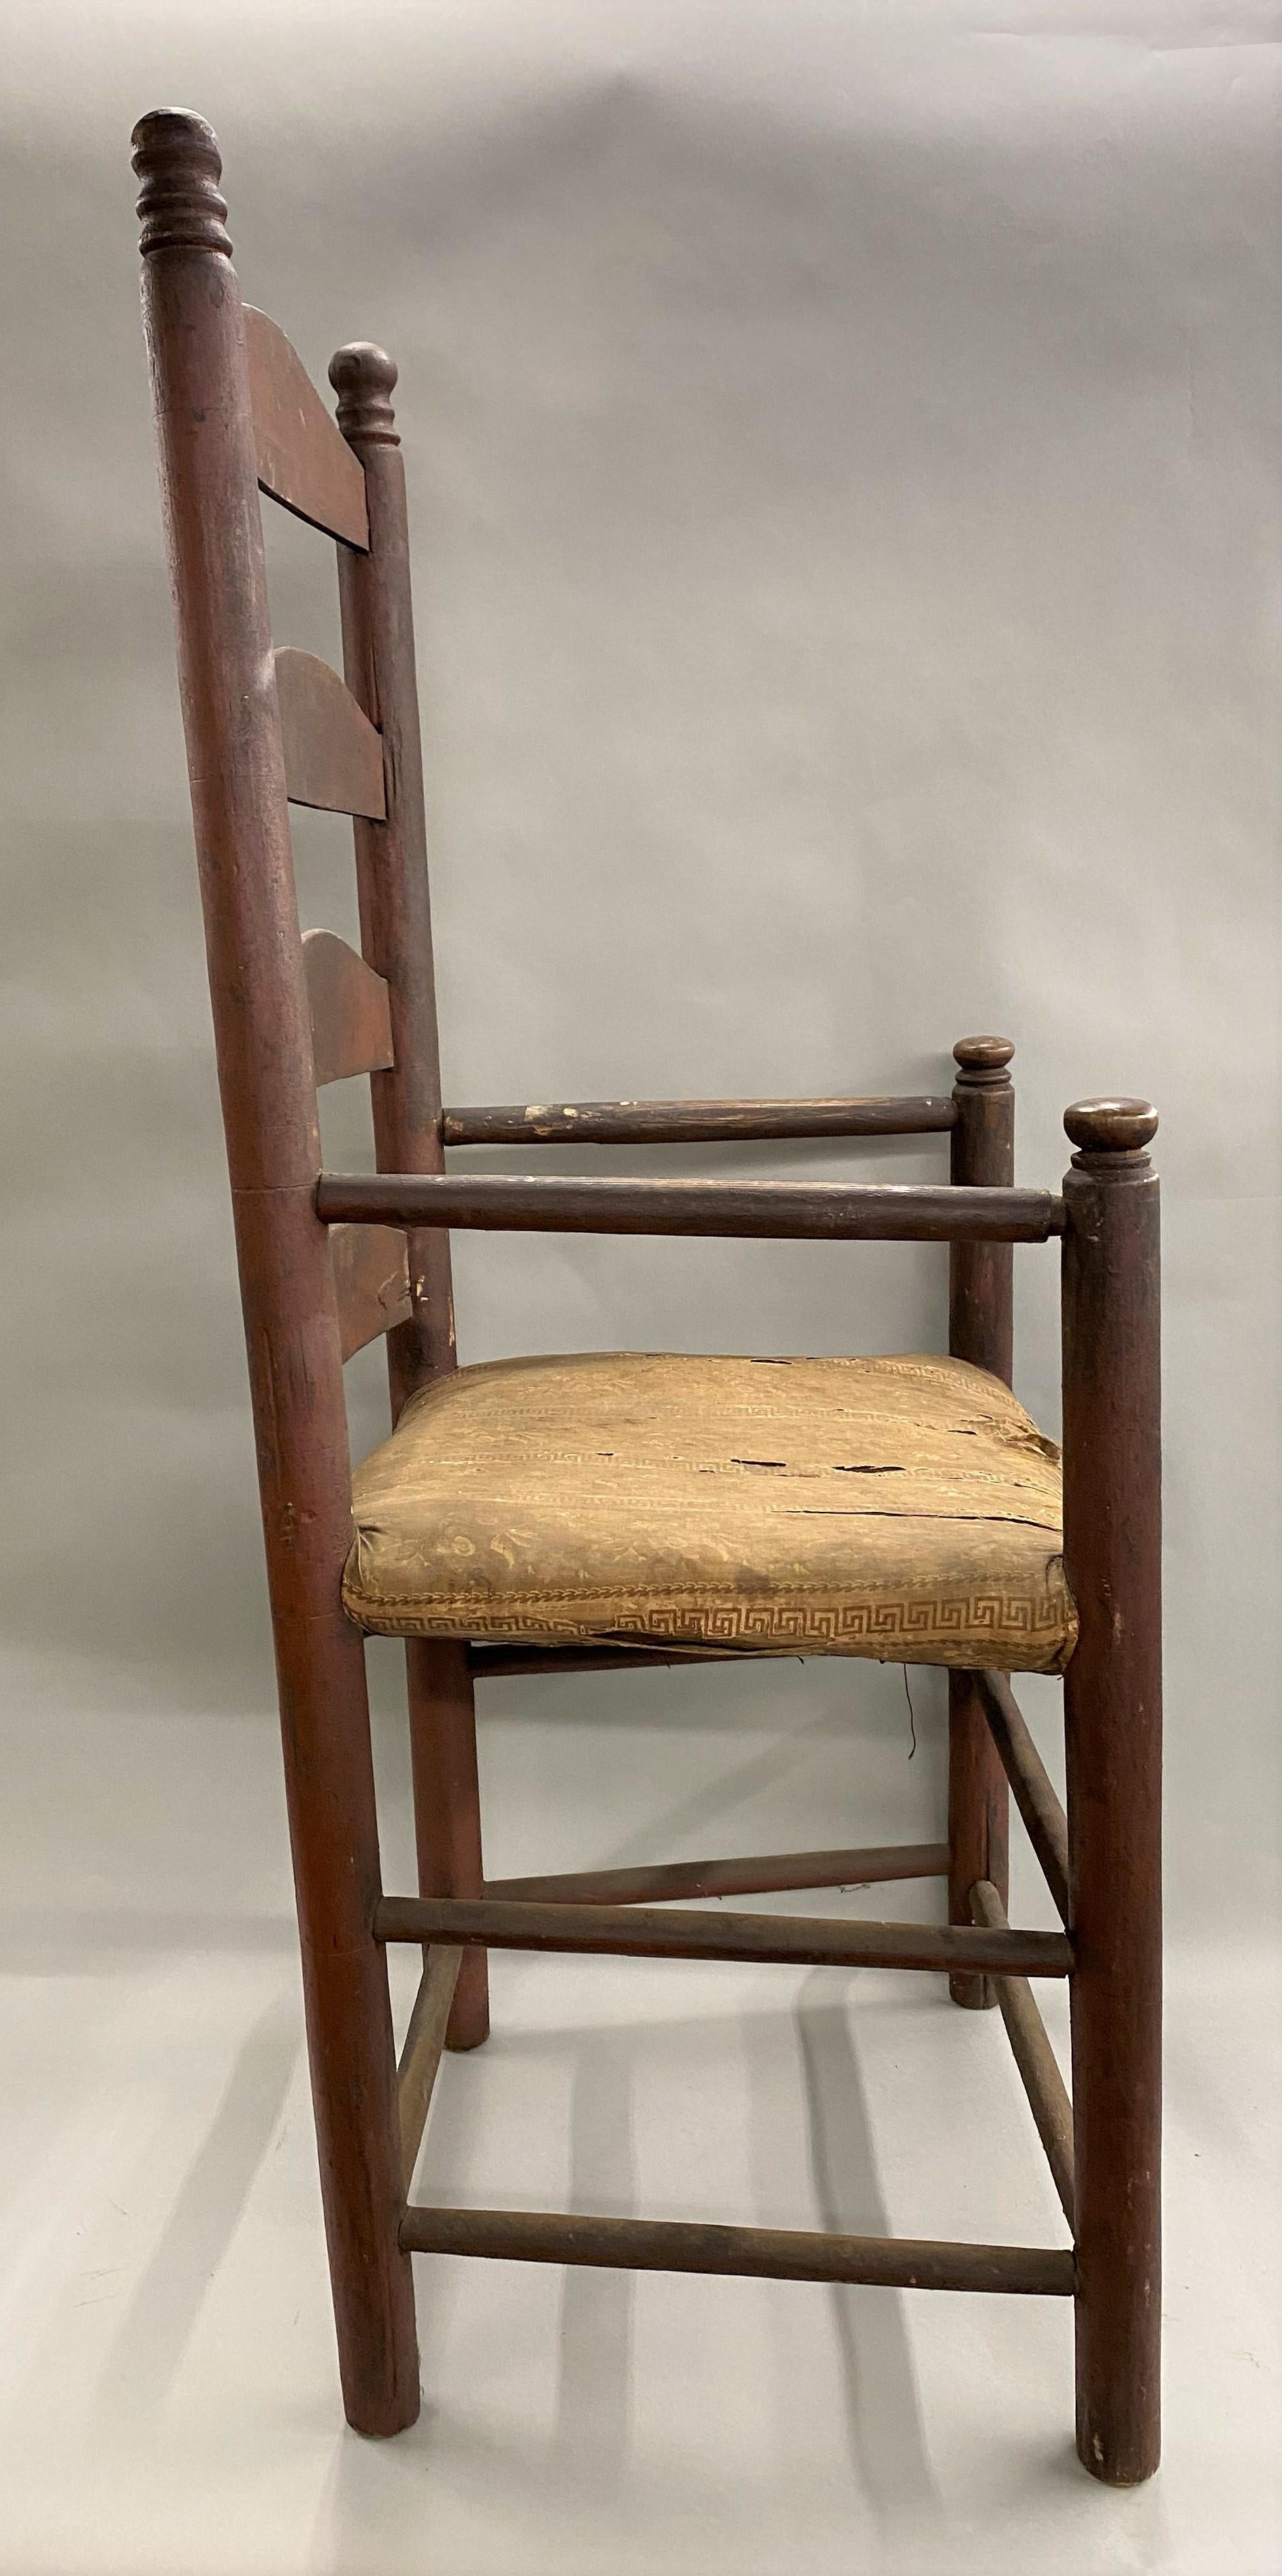 18th Century American Ladder Back Armchair in Old Crusty Red Paint In Good Condition For Sale In Milford, NH